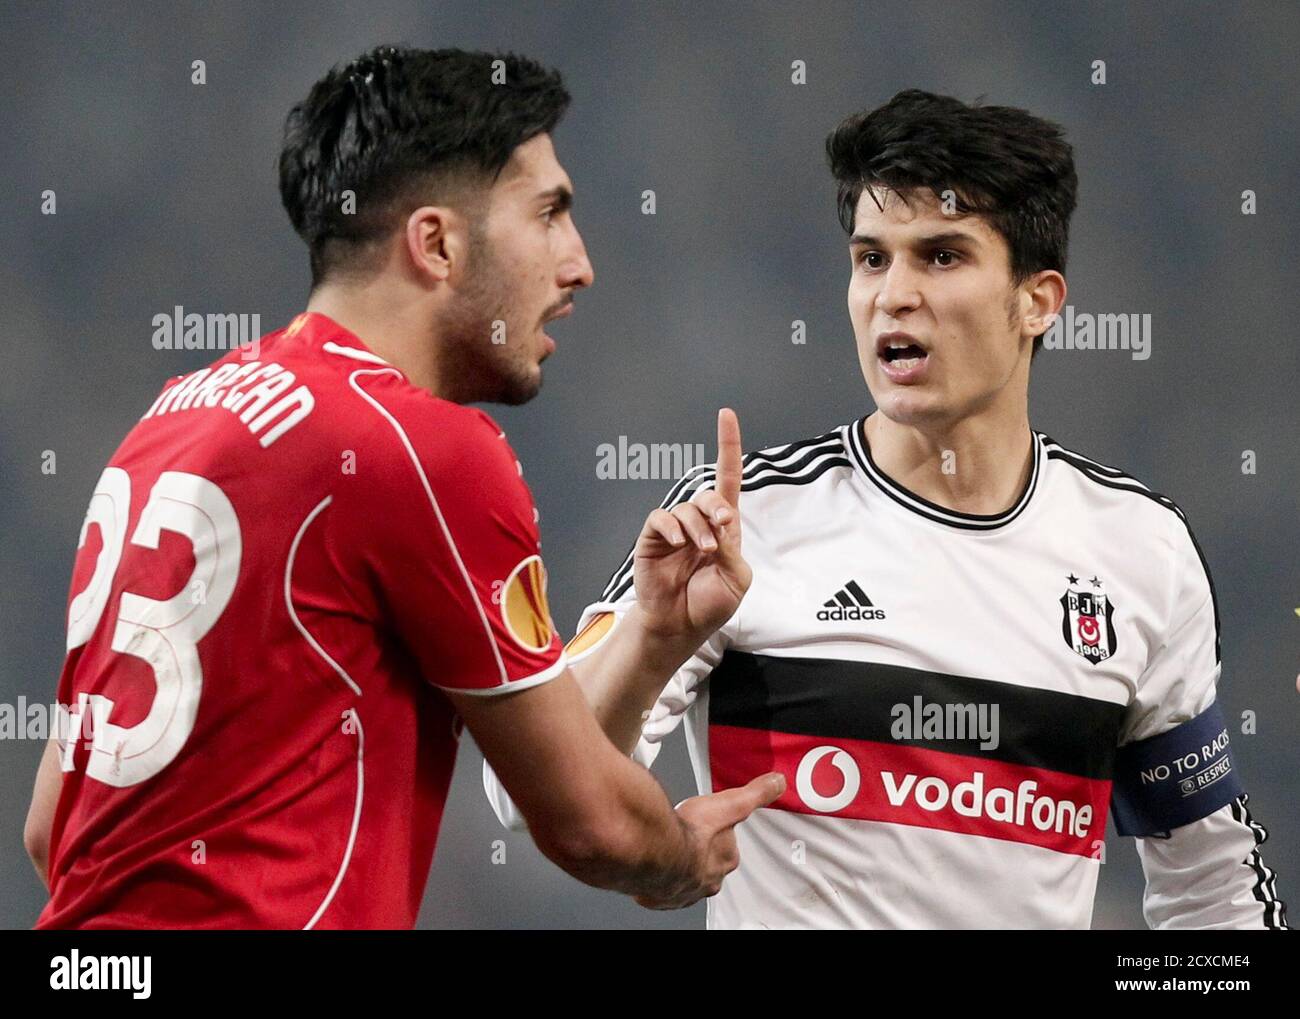 Necip Uysal (R) of Besiktas gestures to Emre Can of Liverpool during their  Europa League round of 32 second leg soccer match against Besiktas in  Istanbul February 26, 2015. REUTERS/Osman Orsal (TURKEY -